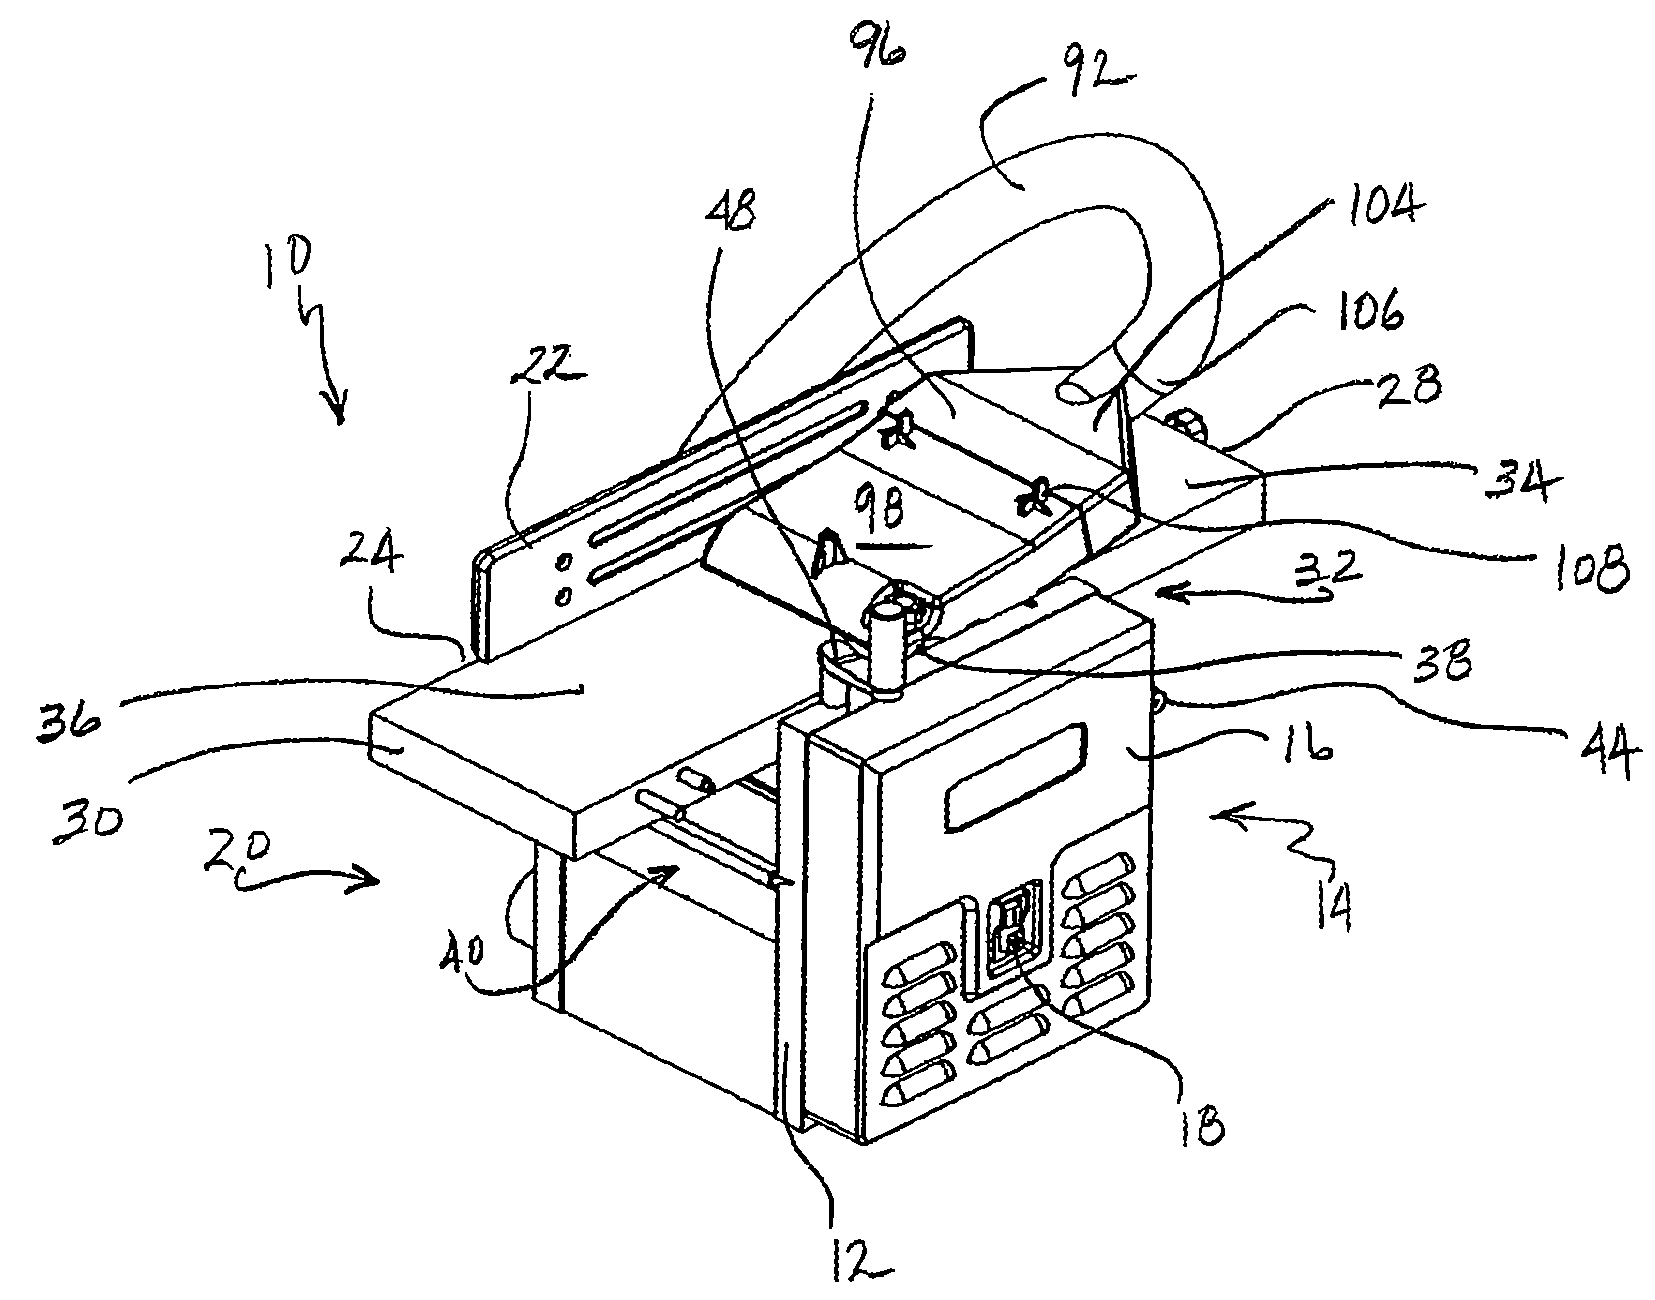 Jointer/planer with internal sawdust collection system